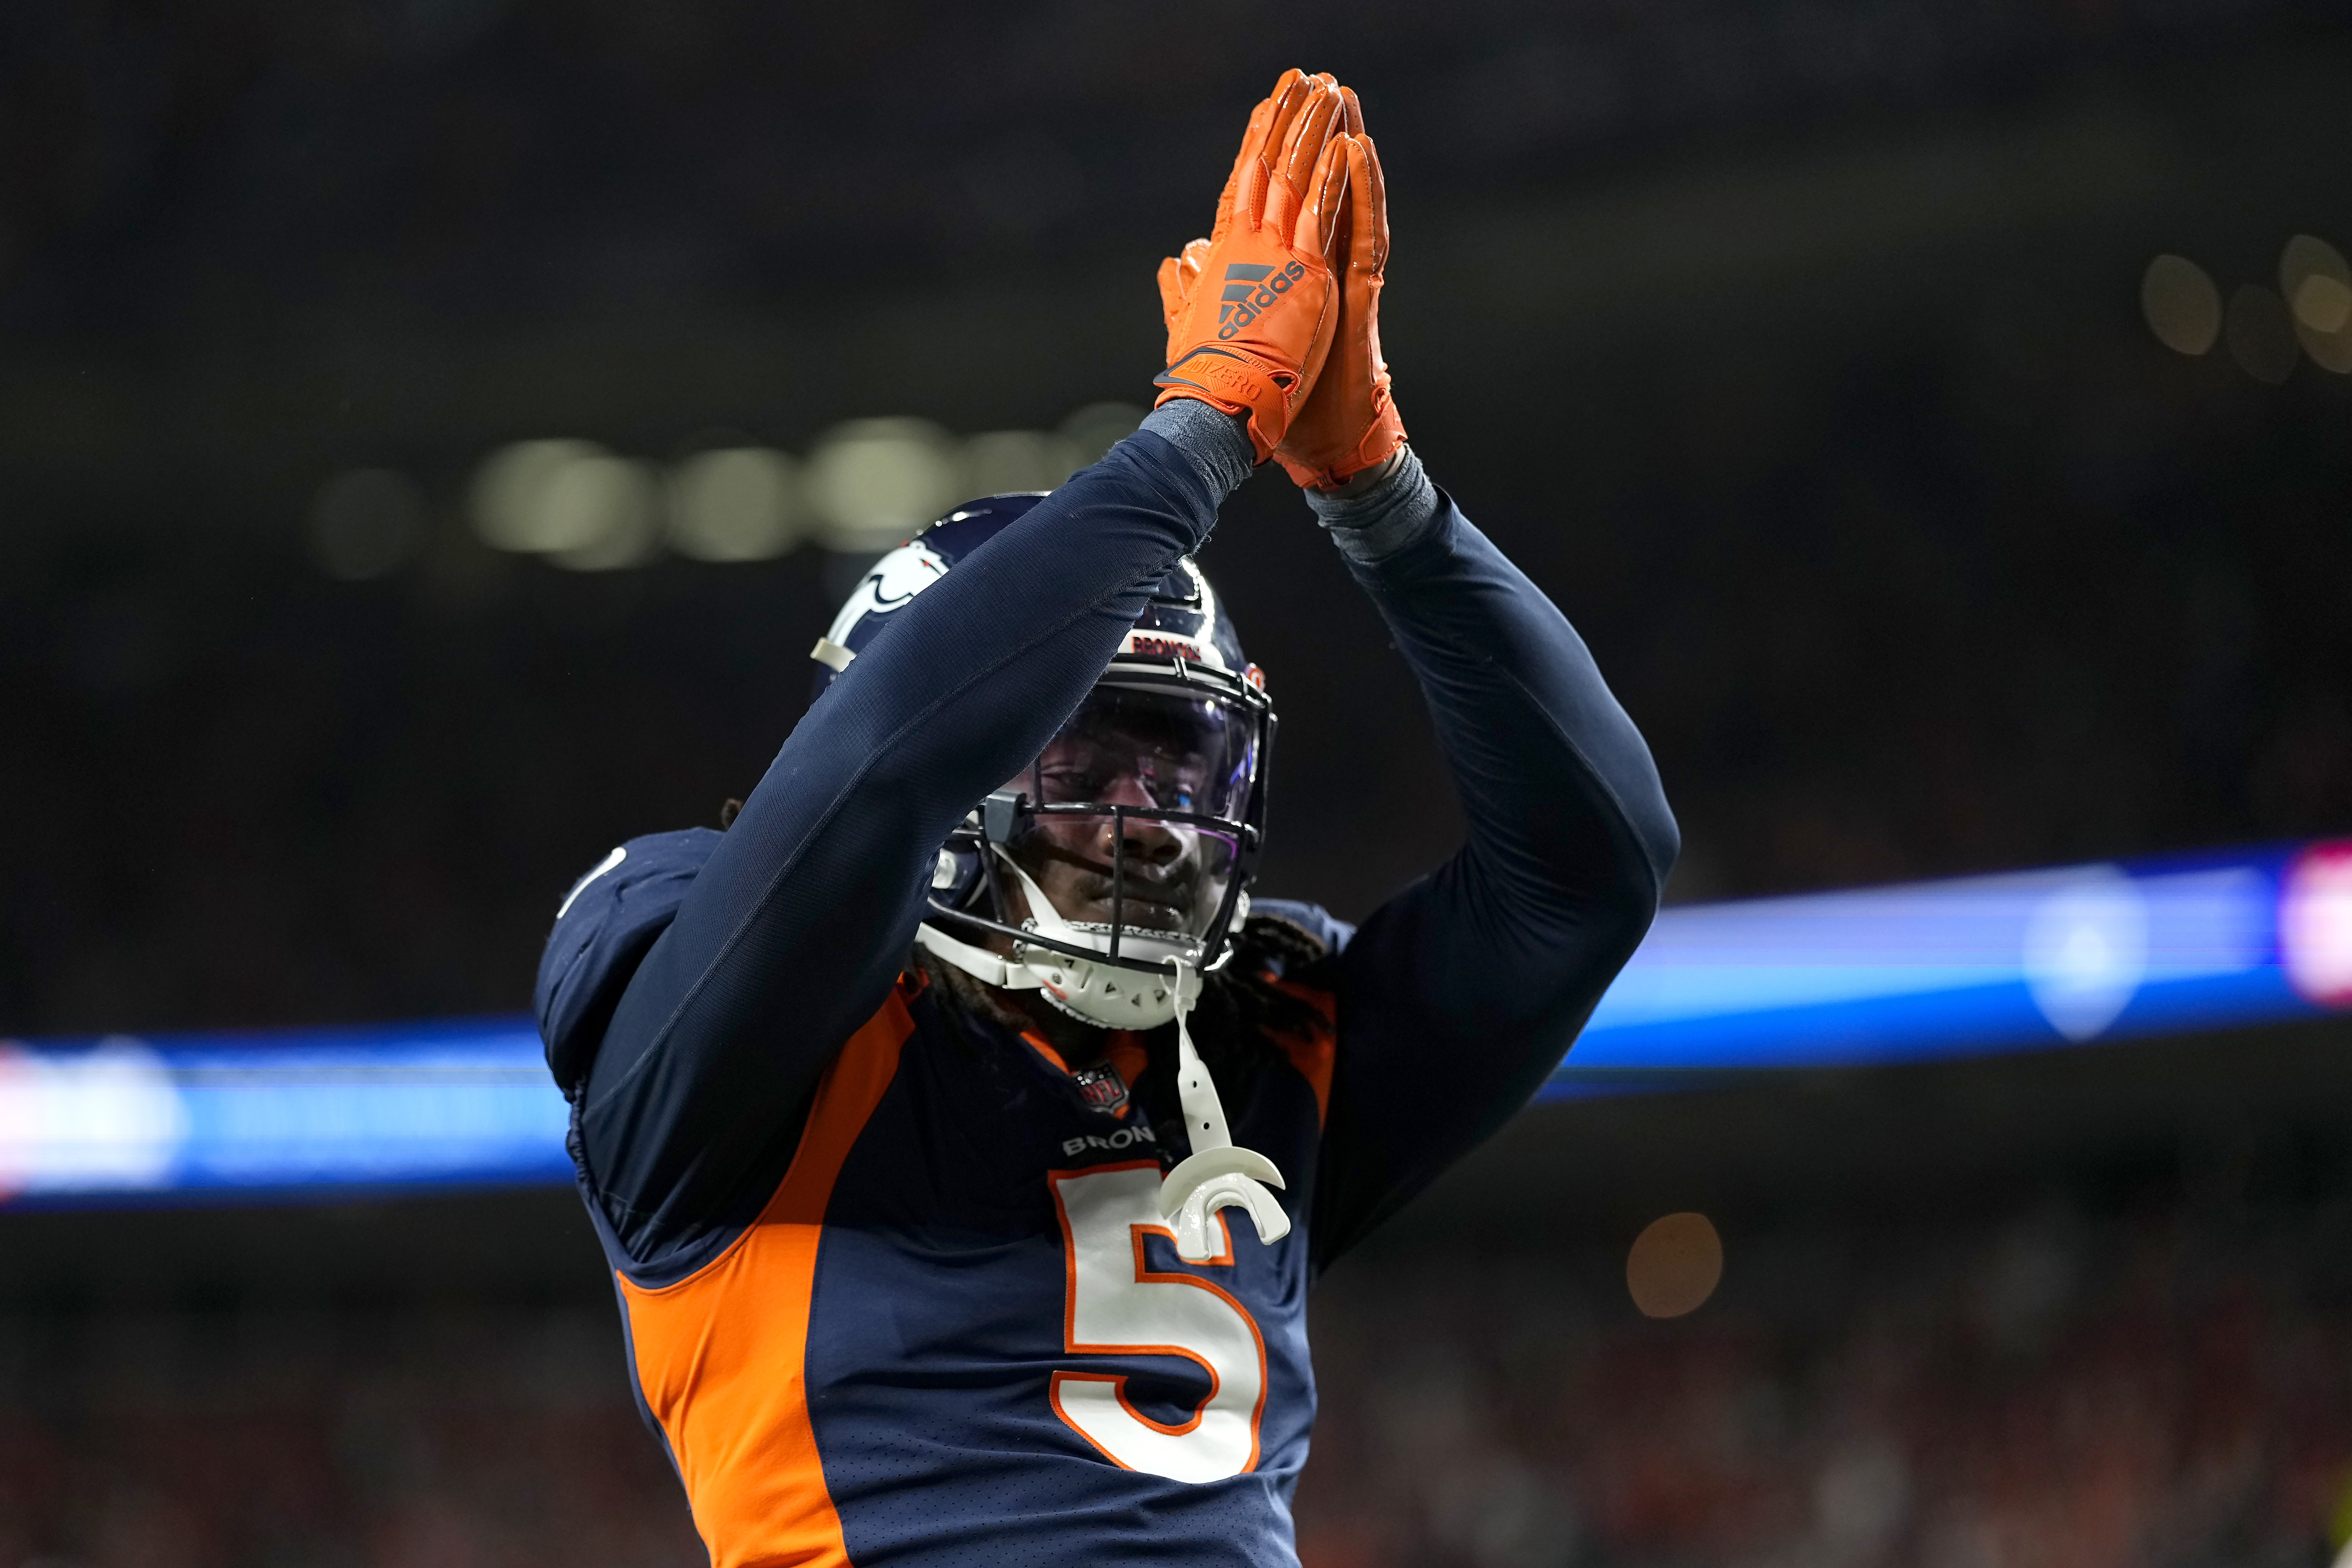 Broncos' Randy Gregory on Texans head coaching candidate Ejiro Evero:  'Coach E elevated our defense, he's a great guy, a very relatable coach'